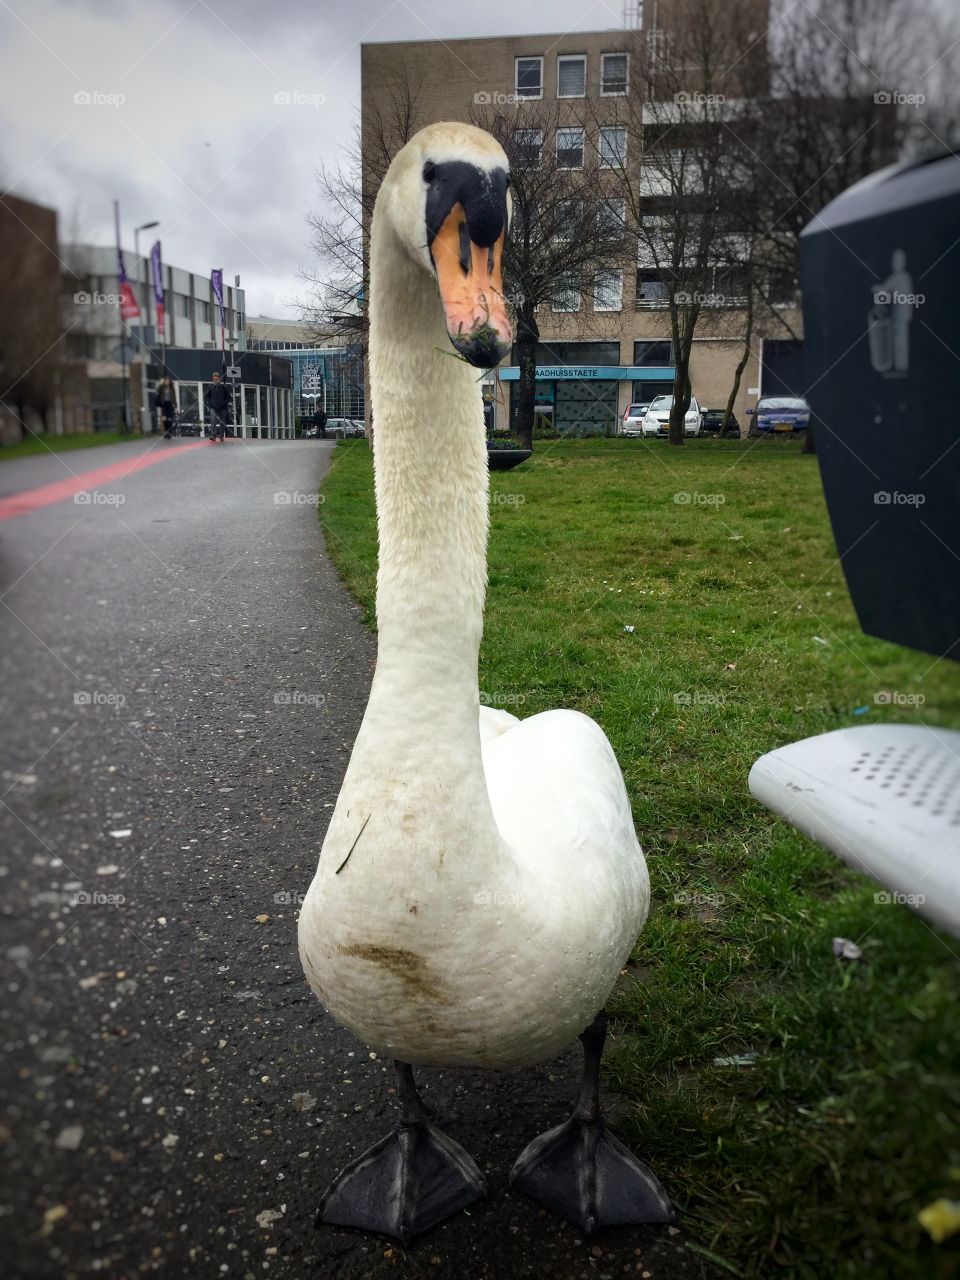 
Swan  is in the city

